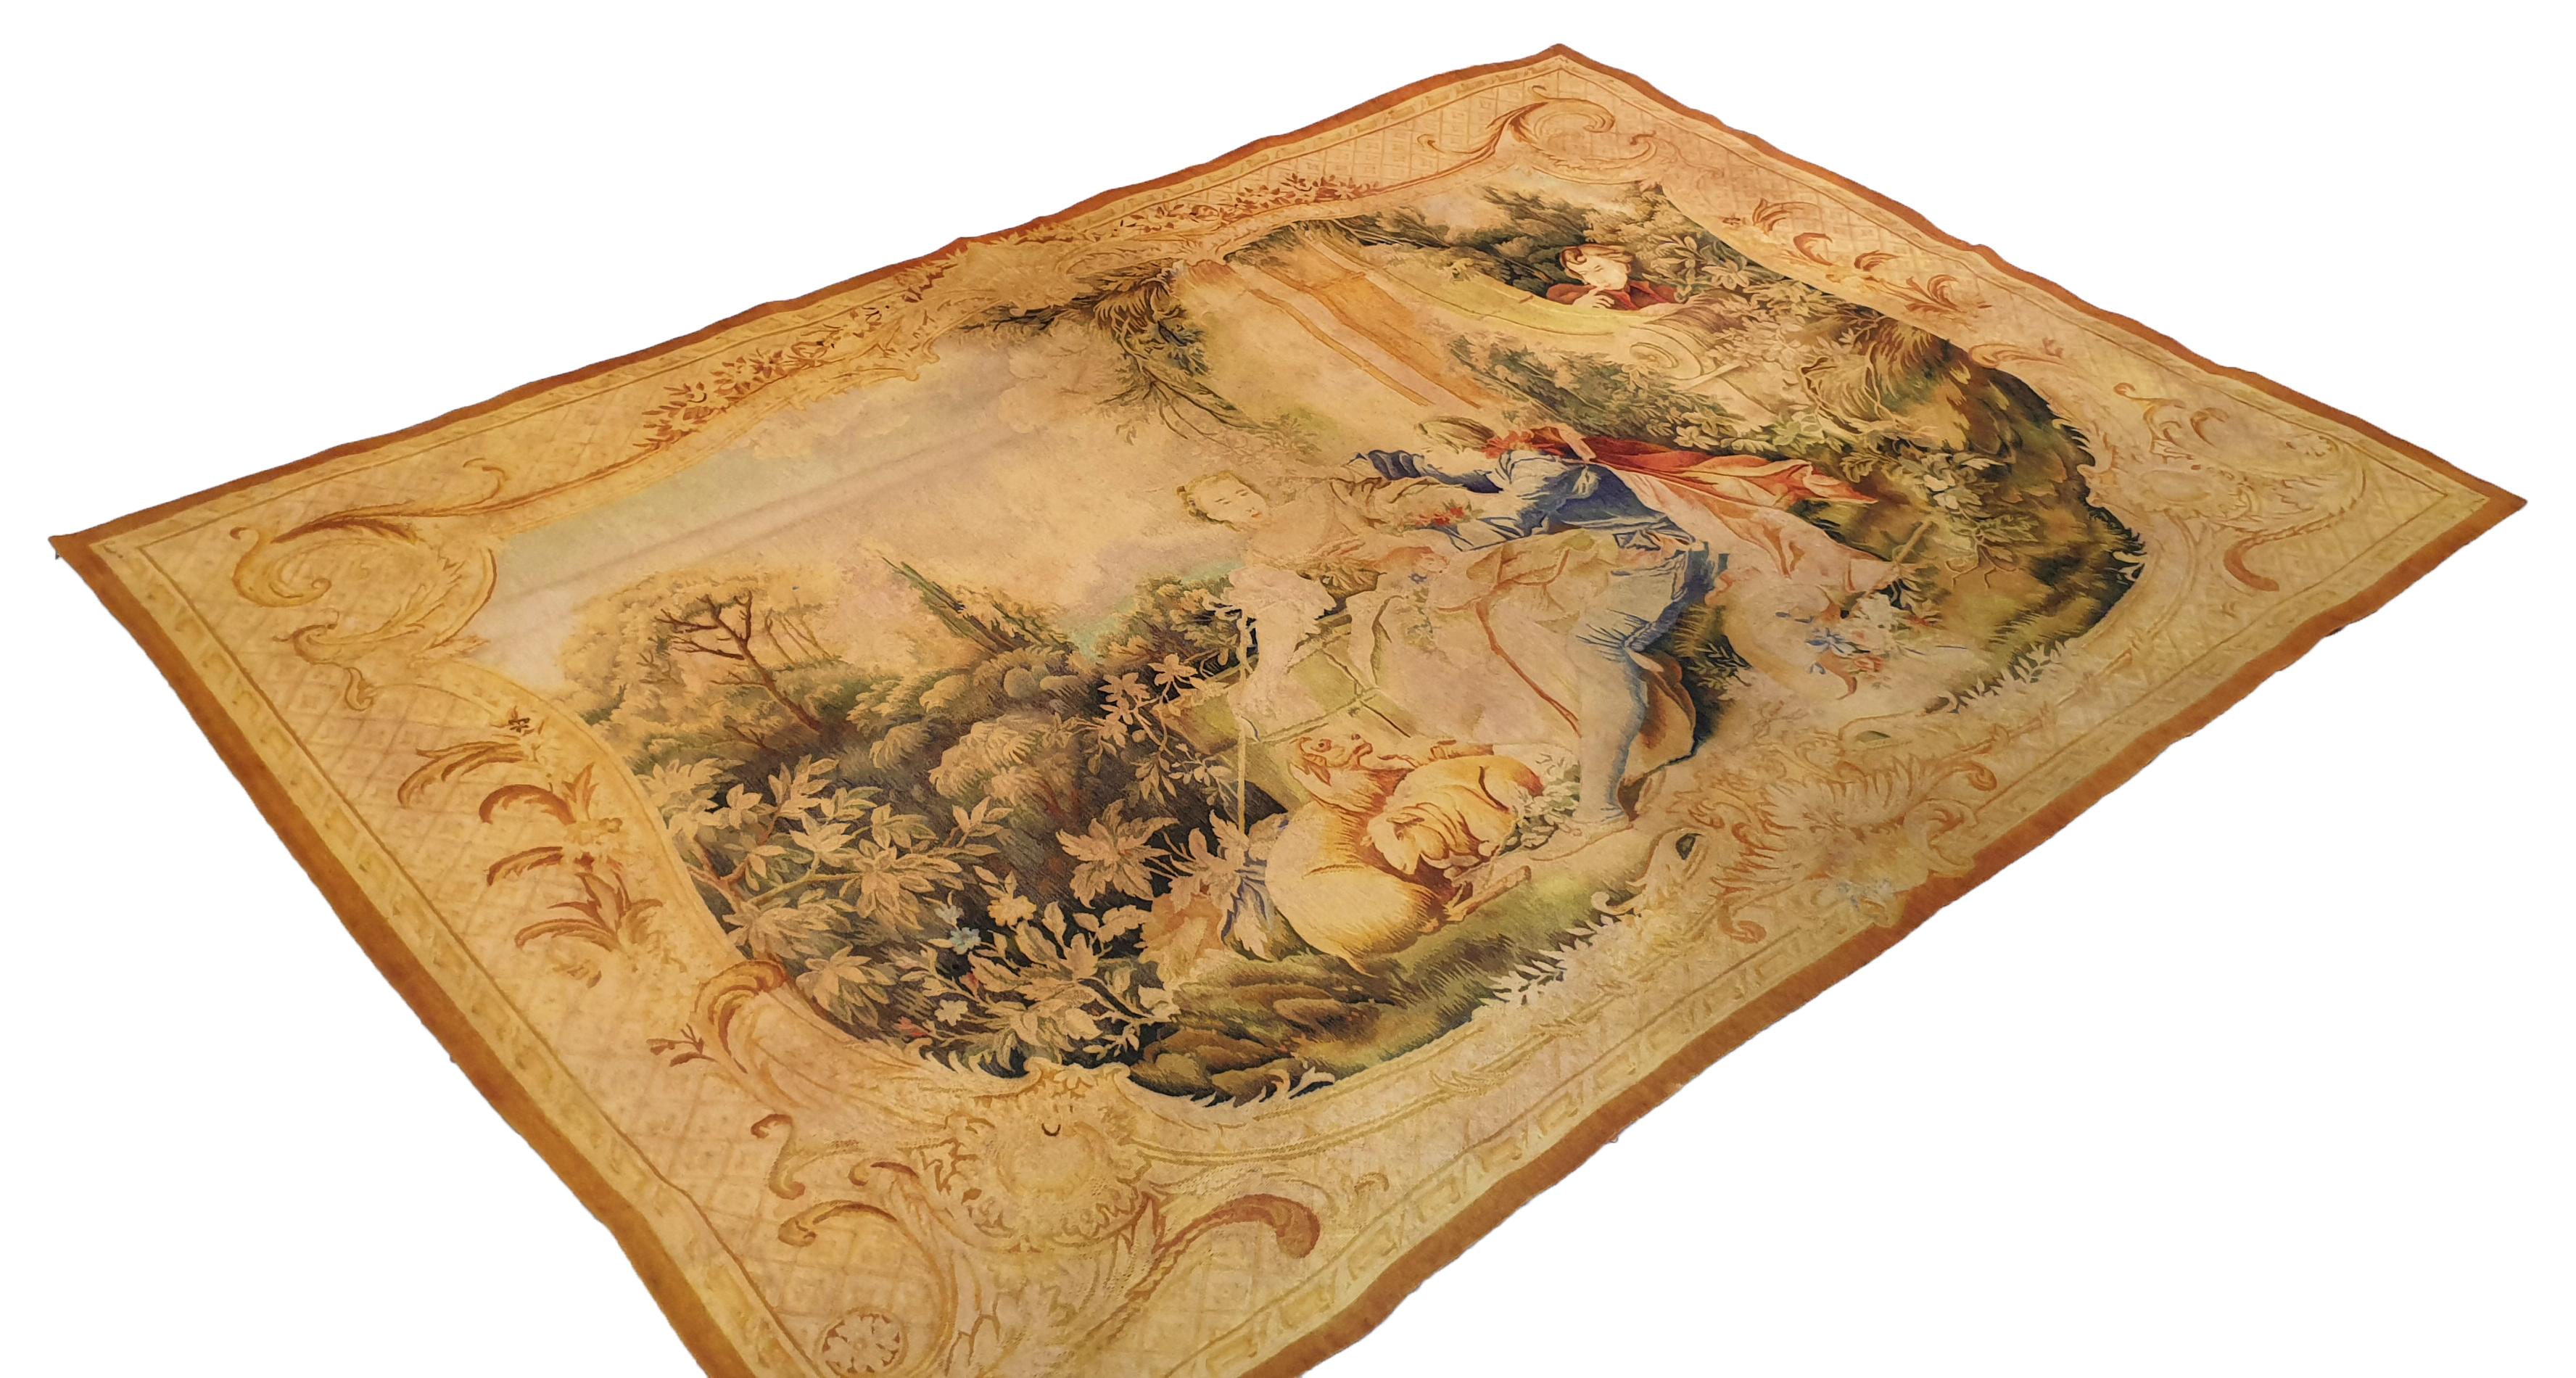 19th century Aubusson tapestry - N° 783

Close to the Eiffel Tower, We are a family business specialized in the purchase, sale and expertise of
tapestries, carpets, kilims and textiles old, modern and contemporary.
We work for private clients,